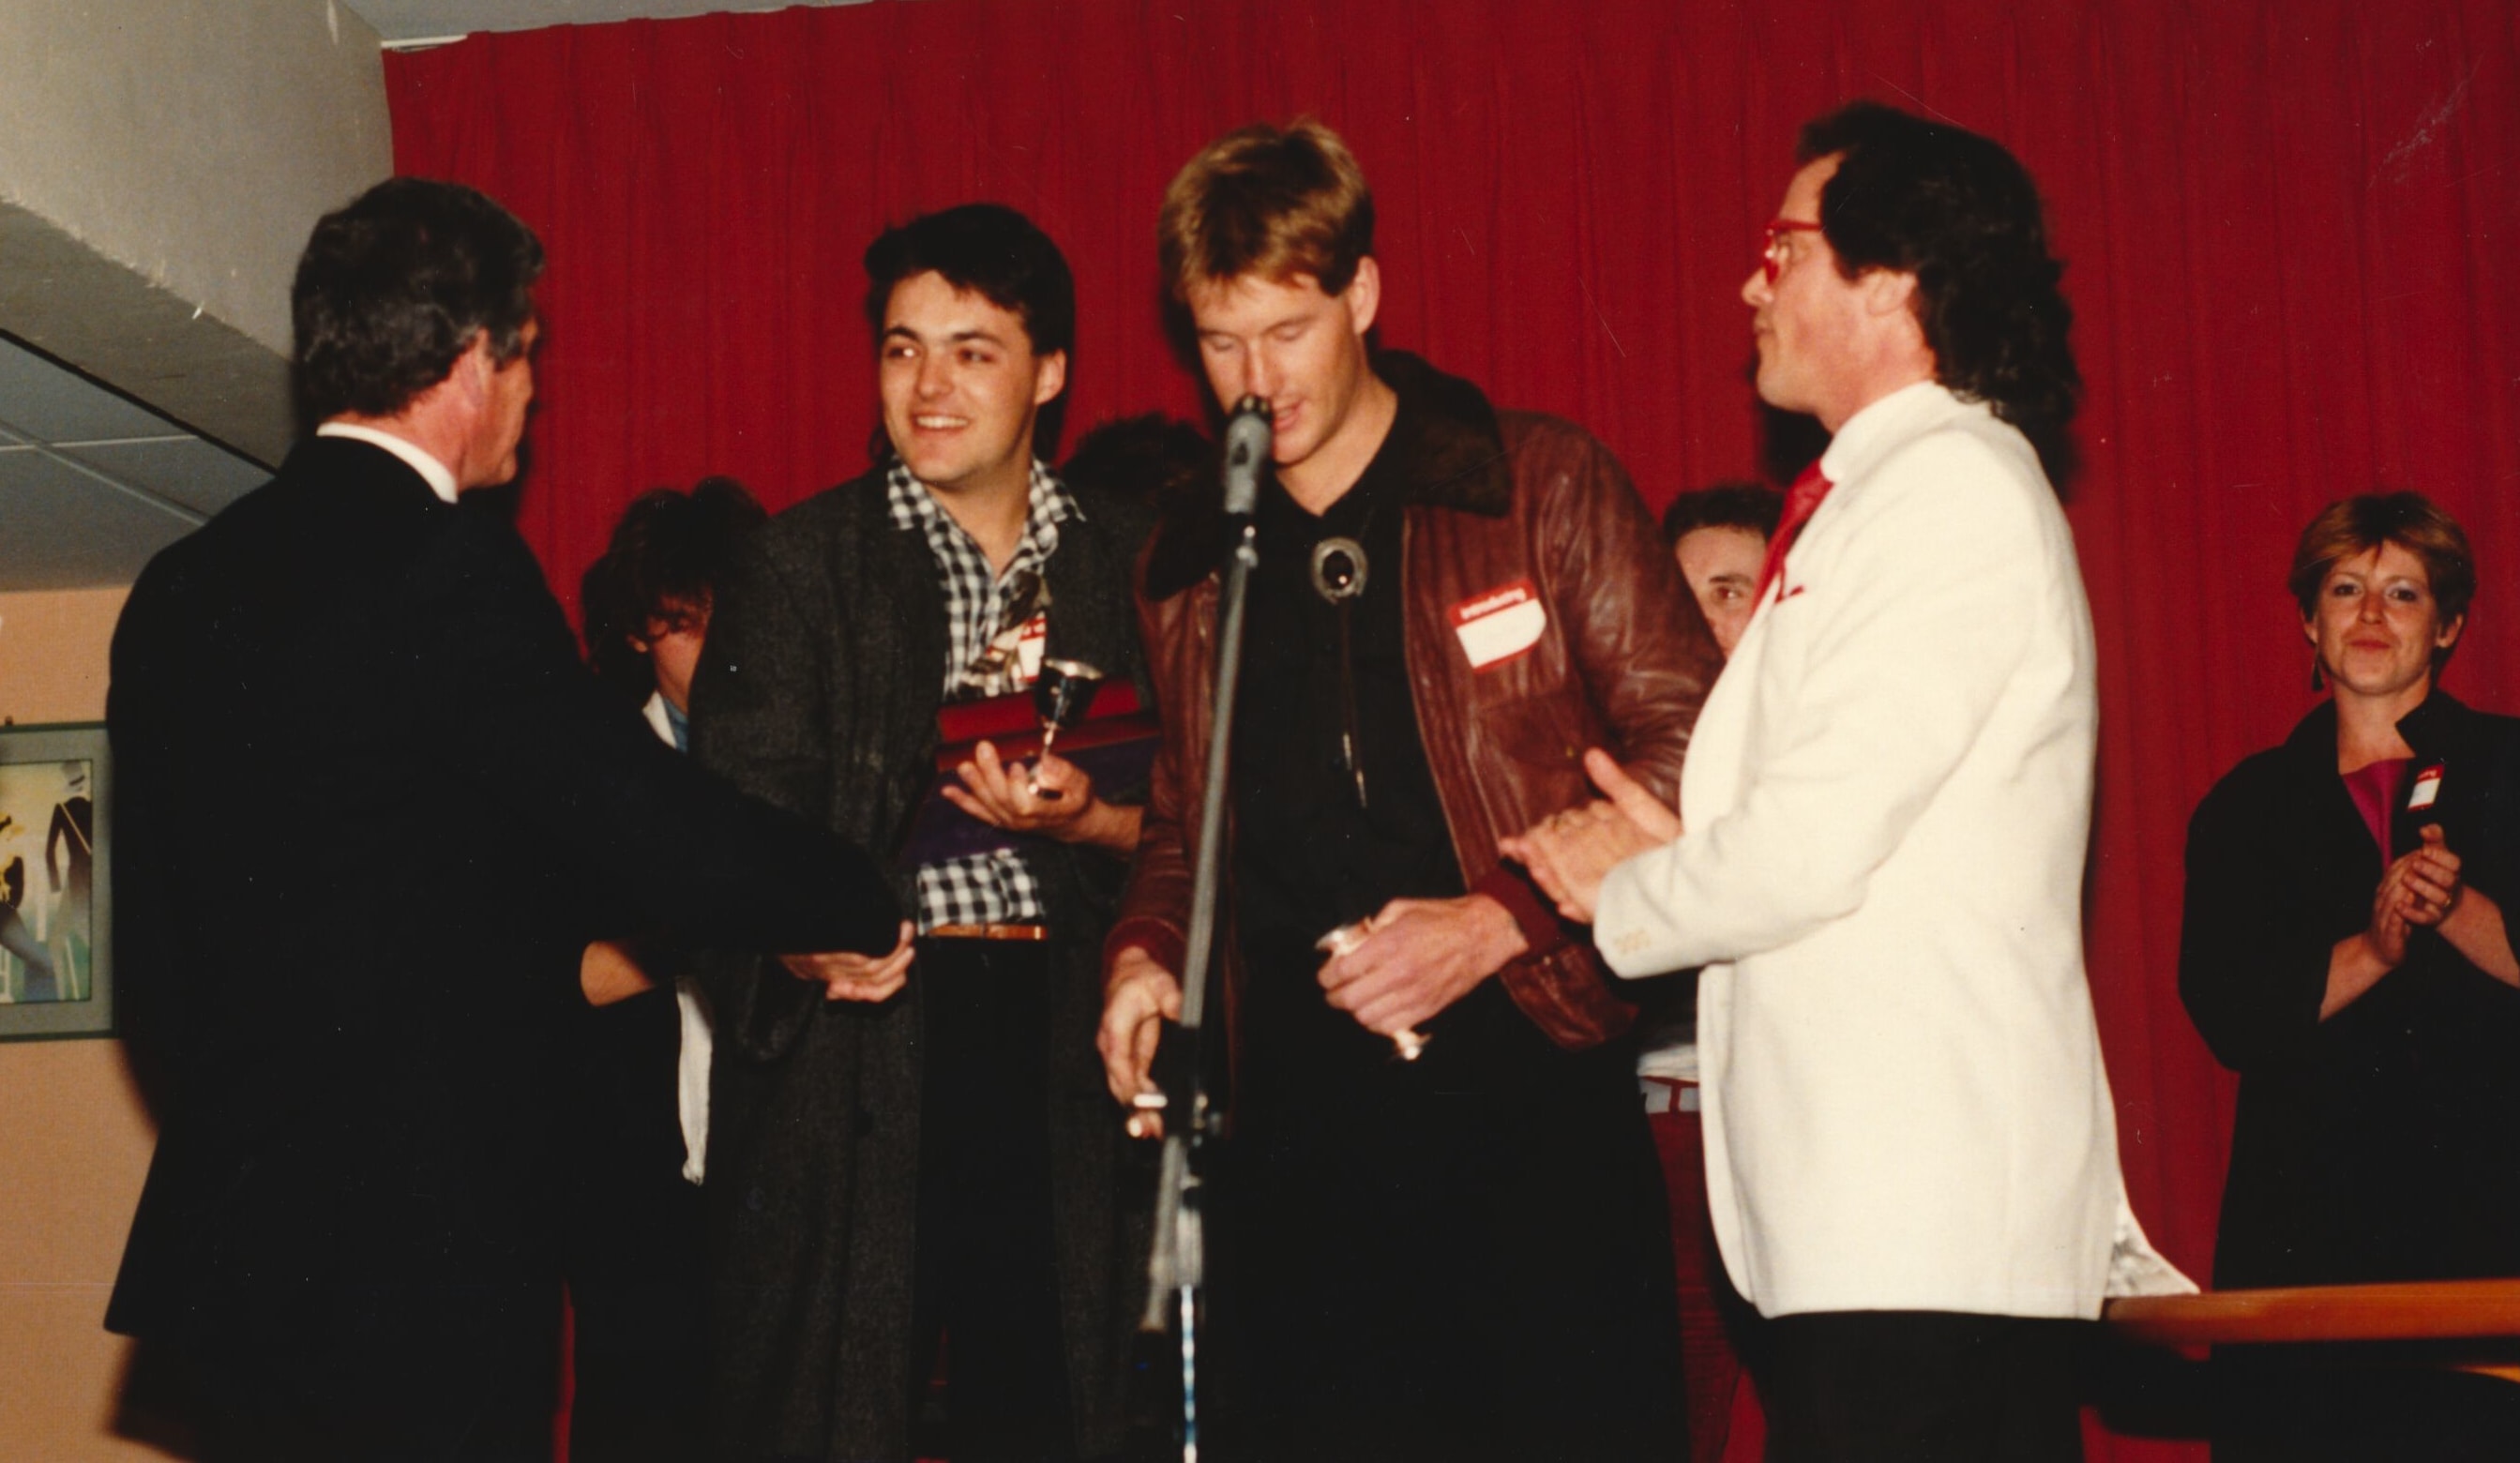 Nick Sampson and Malcolm Black receive the 1985 APRA Silver Scroll for For Today